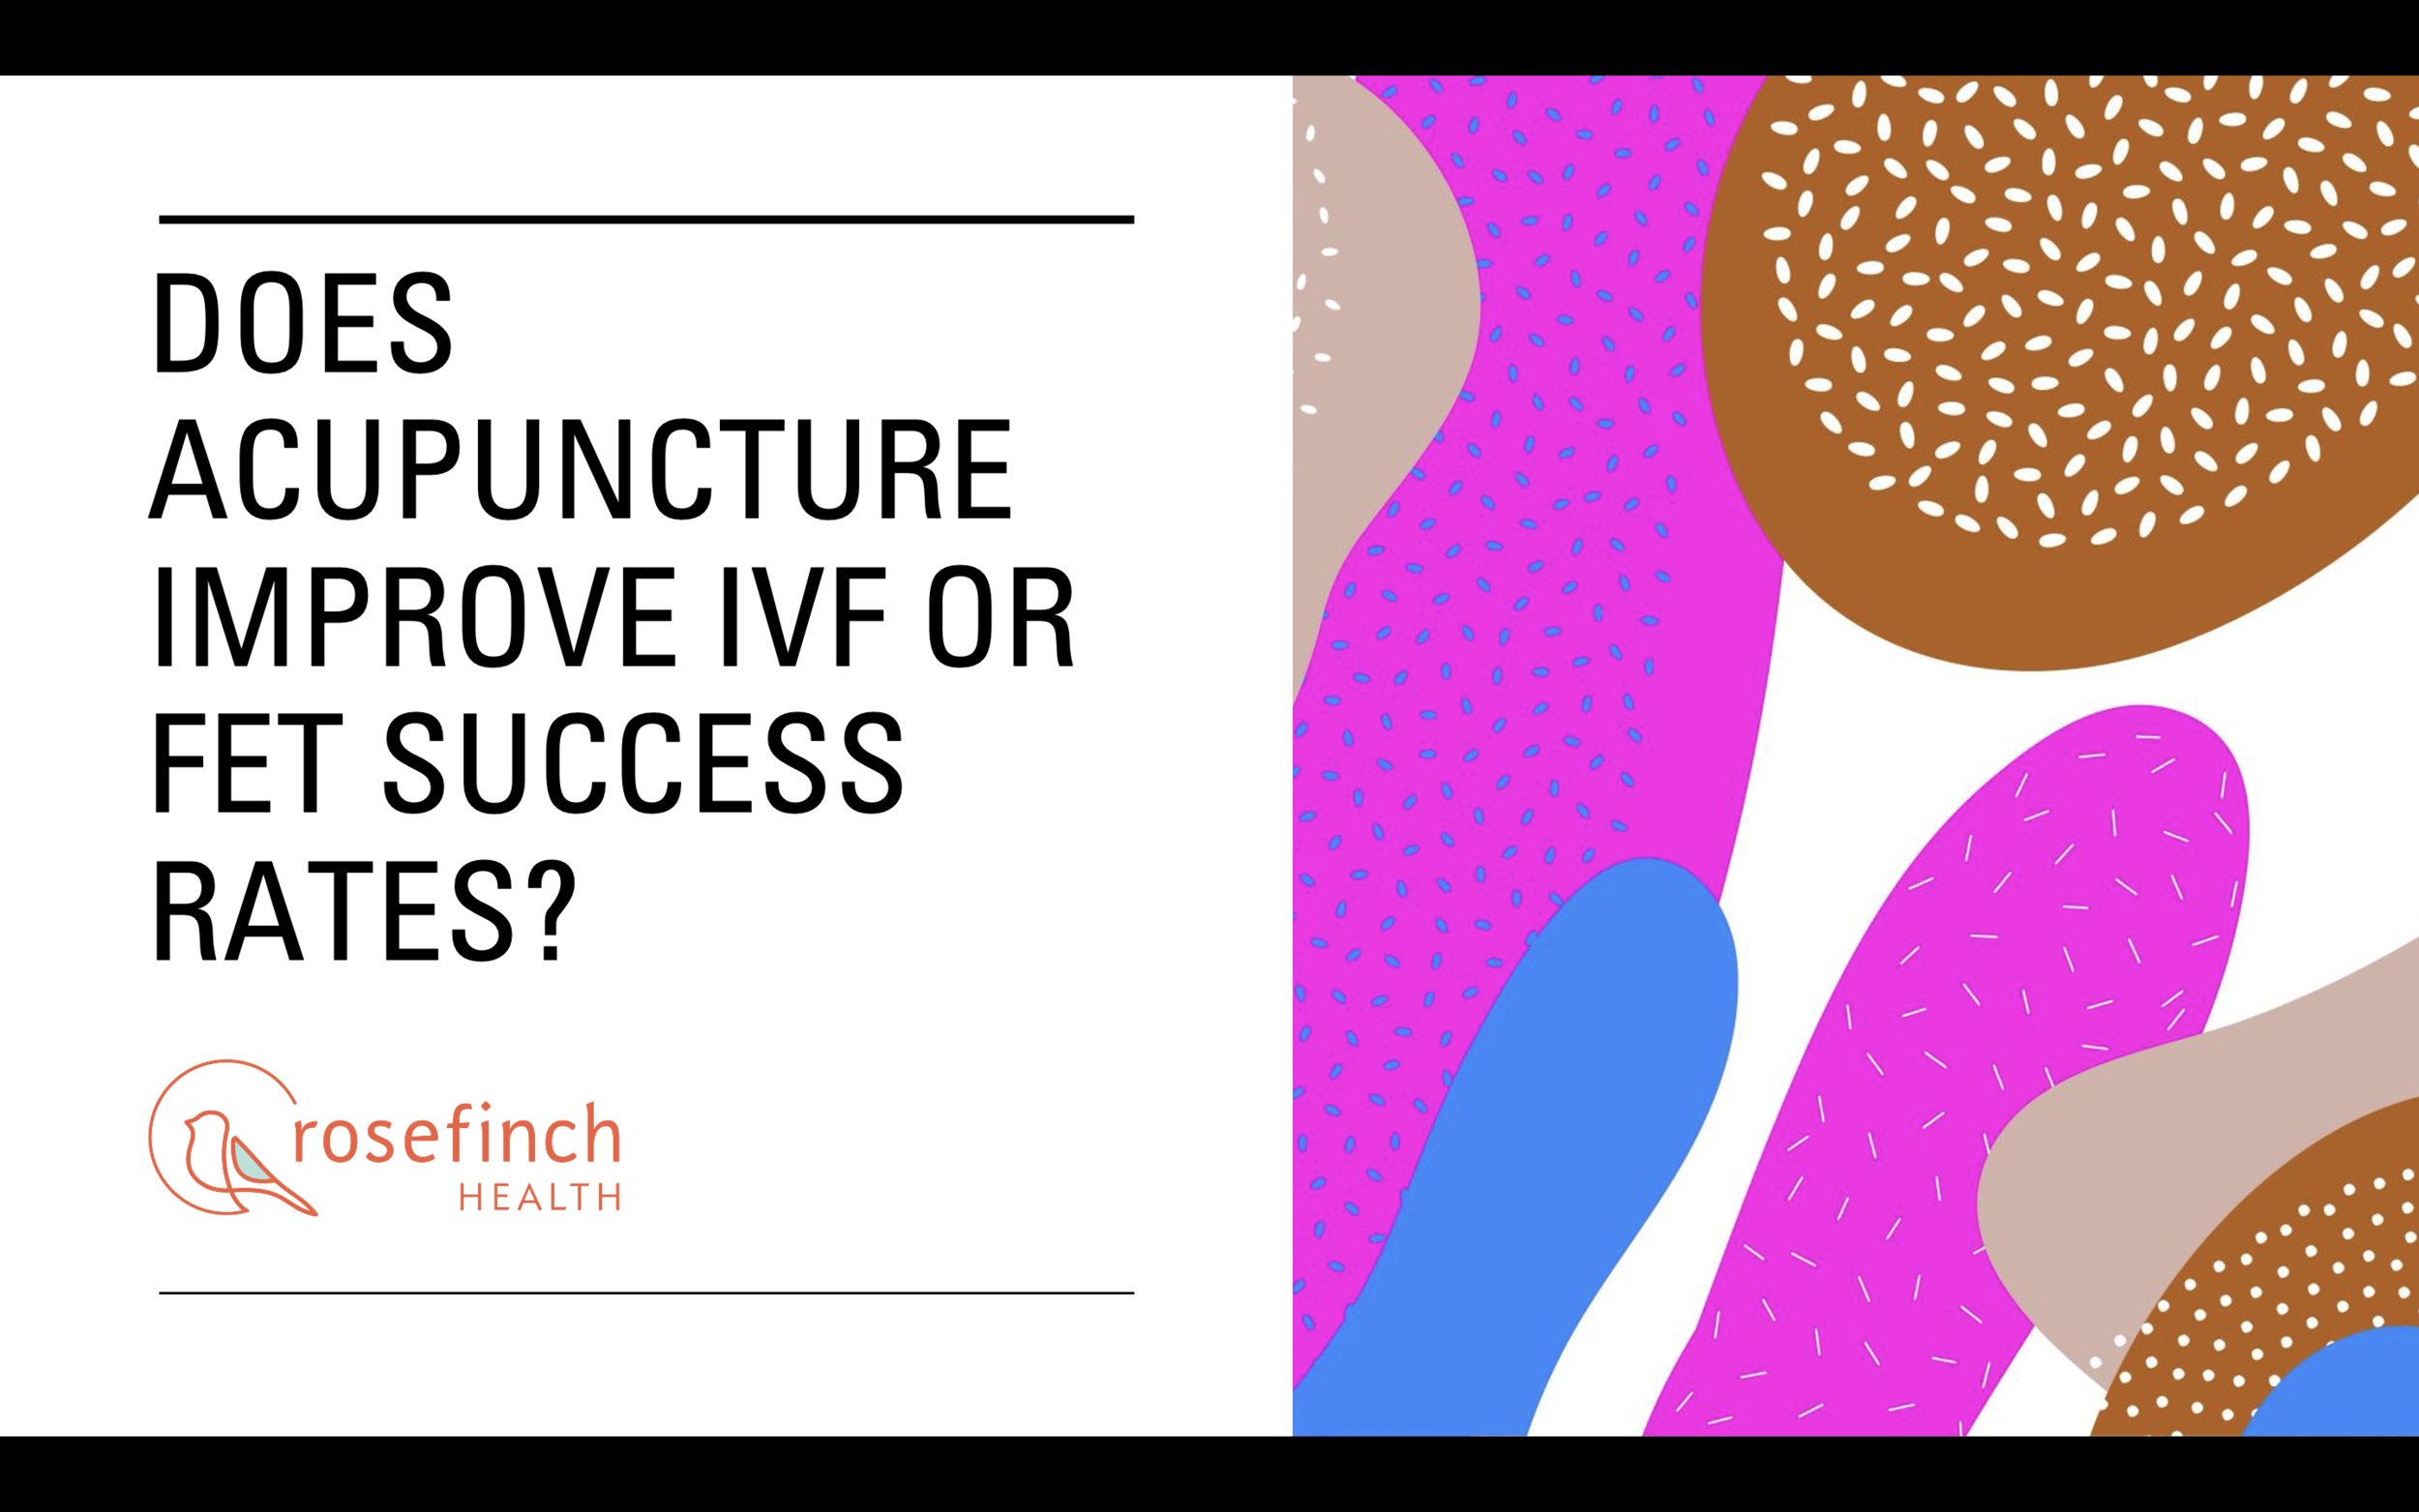 Does acupuncture improve IVF or FET success rates?